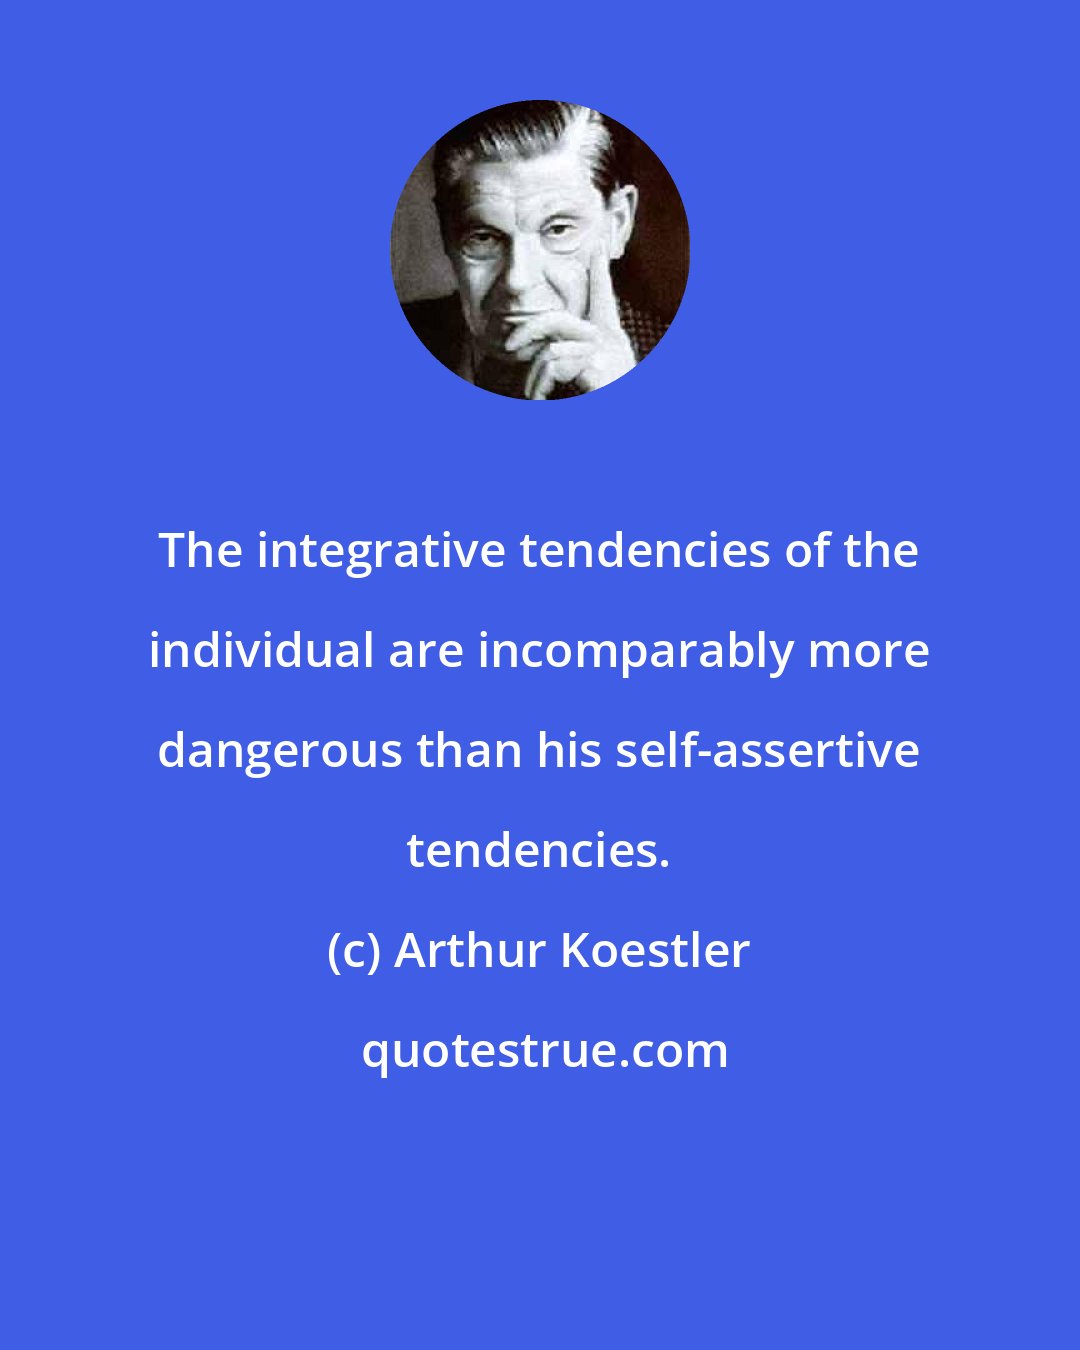 Arthur Koestler: The integrative tendencies of the individual are incomparably more dangerous than his self-assertive tendencies.